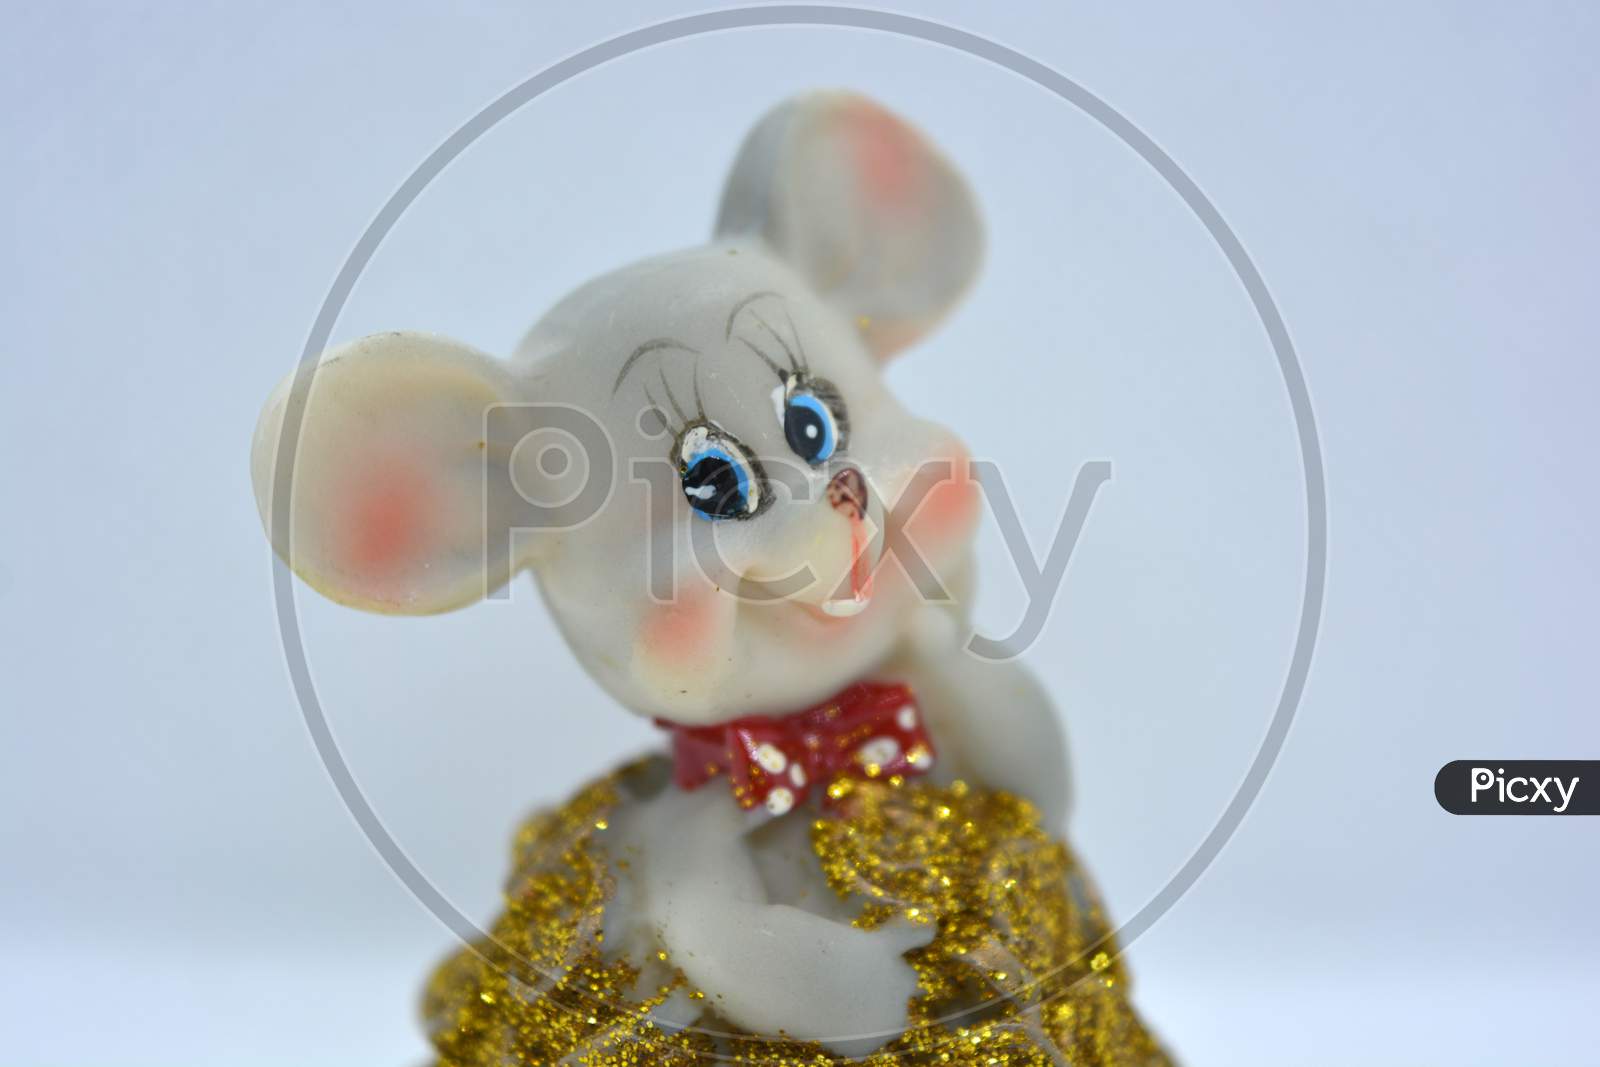 Ceramic statuette of a cute gray mouse with large ears that stands in a pile of brassing gold coins.